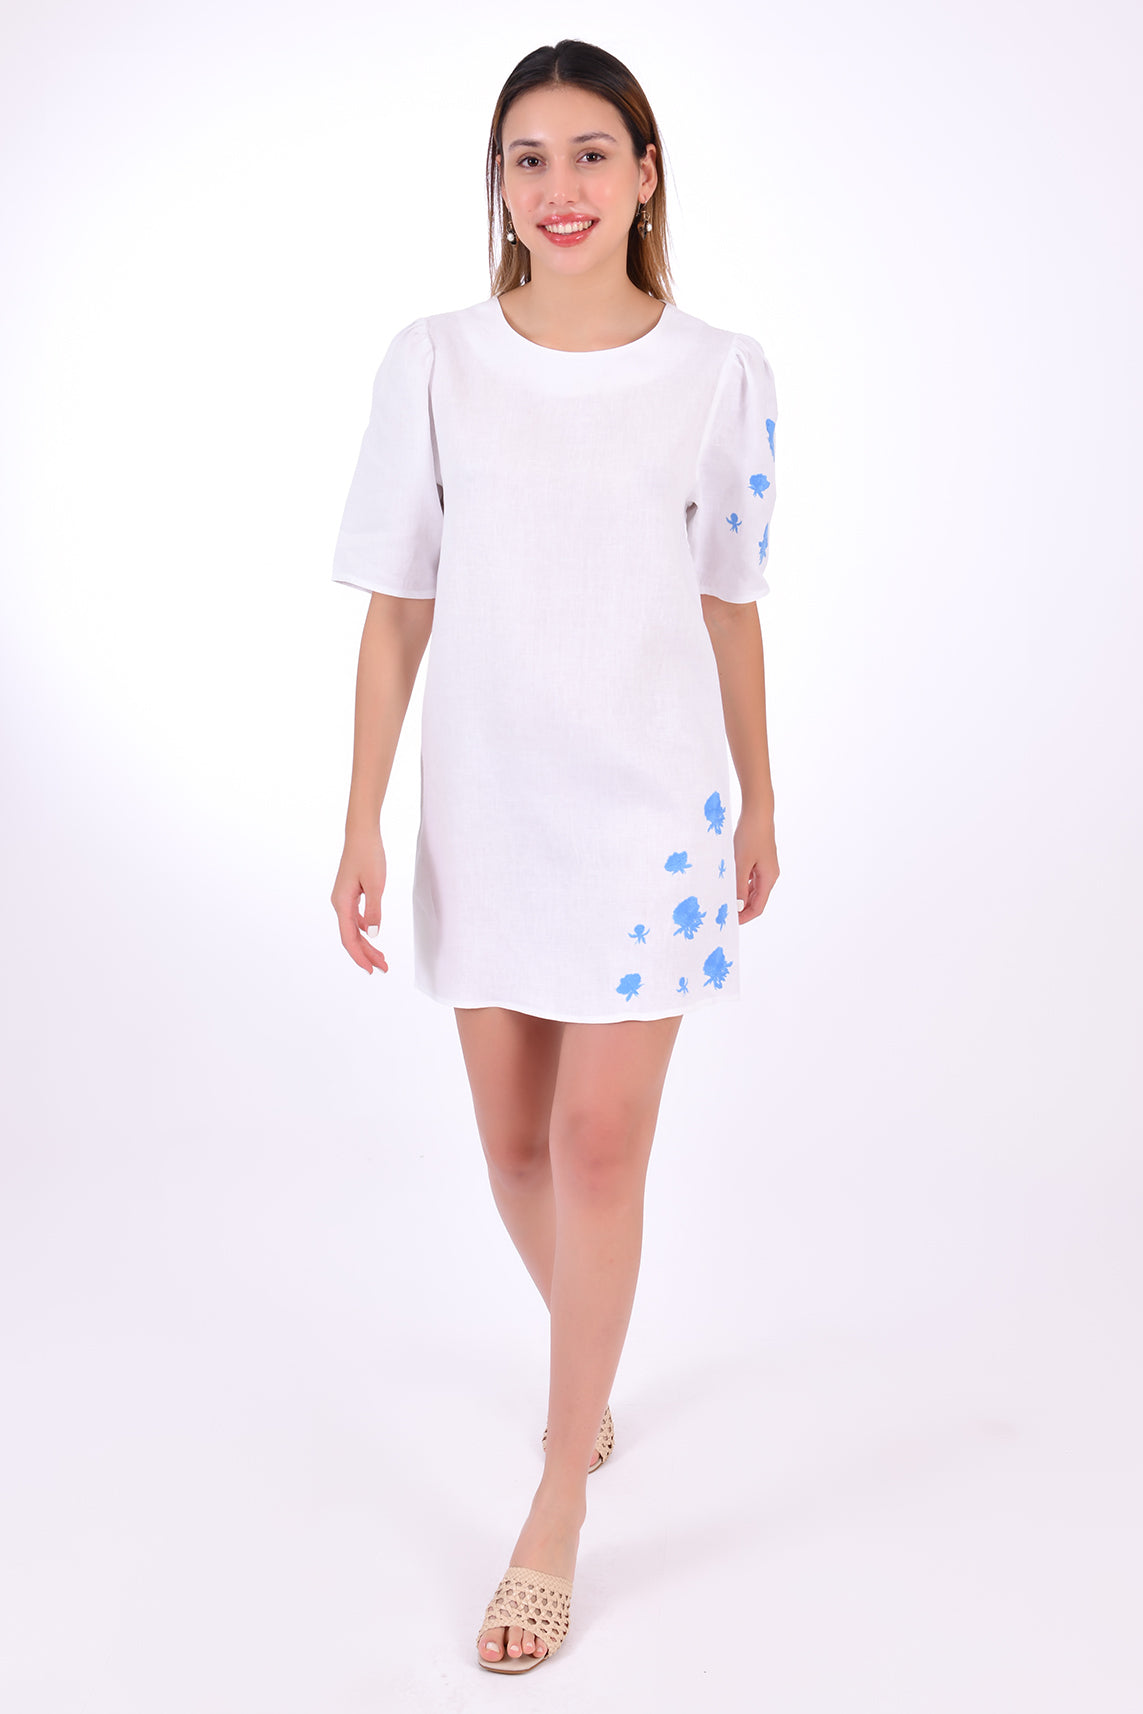 Fanm Mon Deniz Linen Dress Front View. Mini Linen Dress. Featuring a peephole open back and button closure. Round neck, with belted detail at the waist and on sleeves with front embroidery pattern.